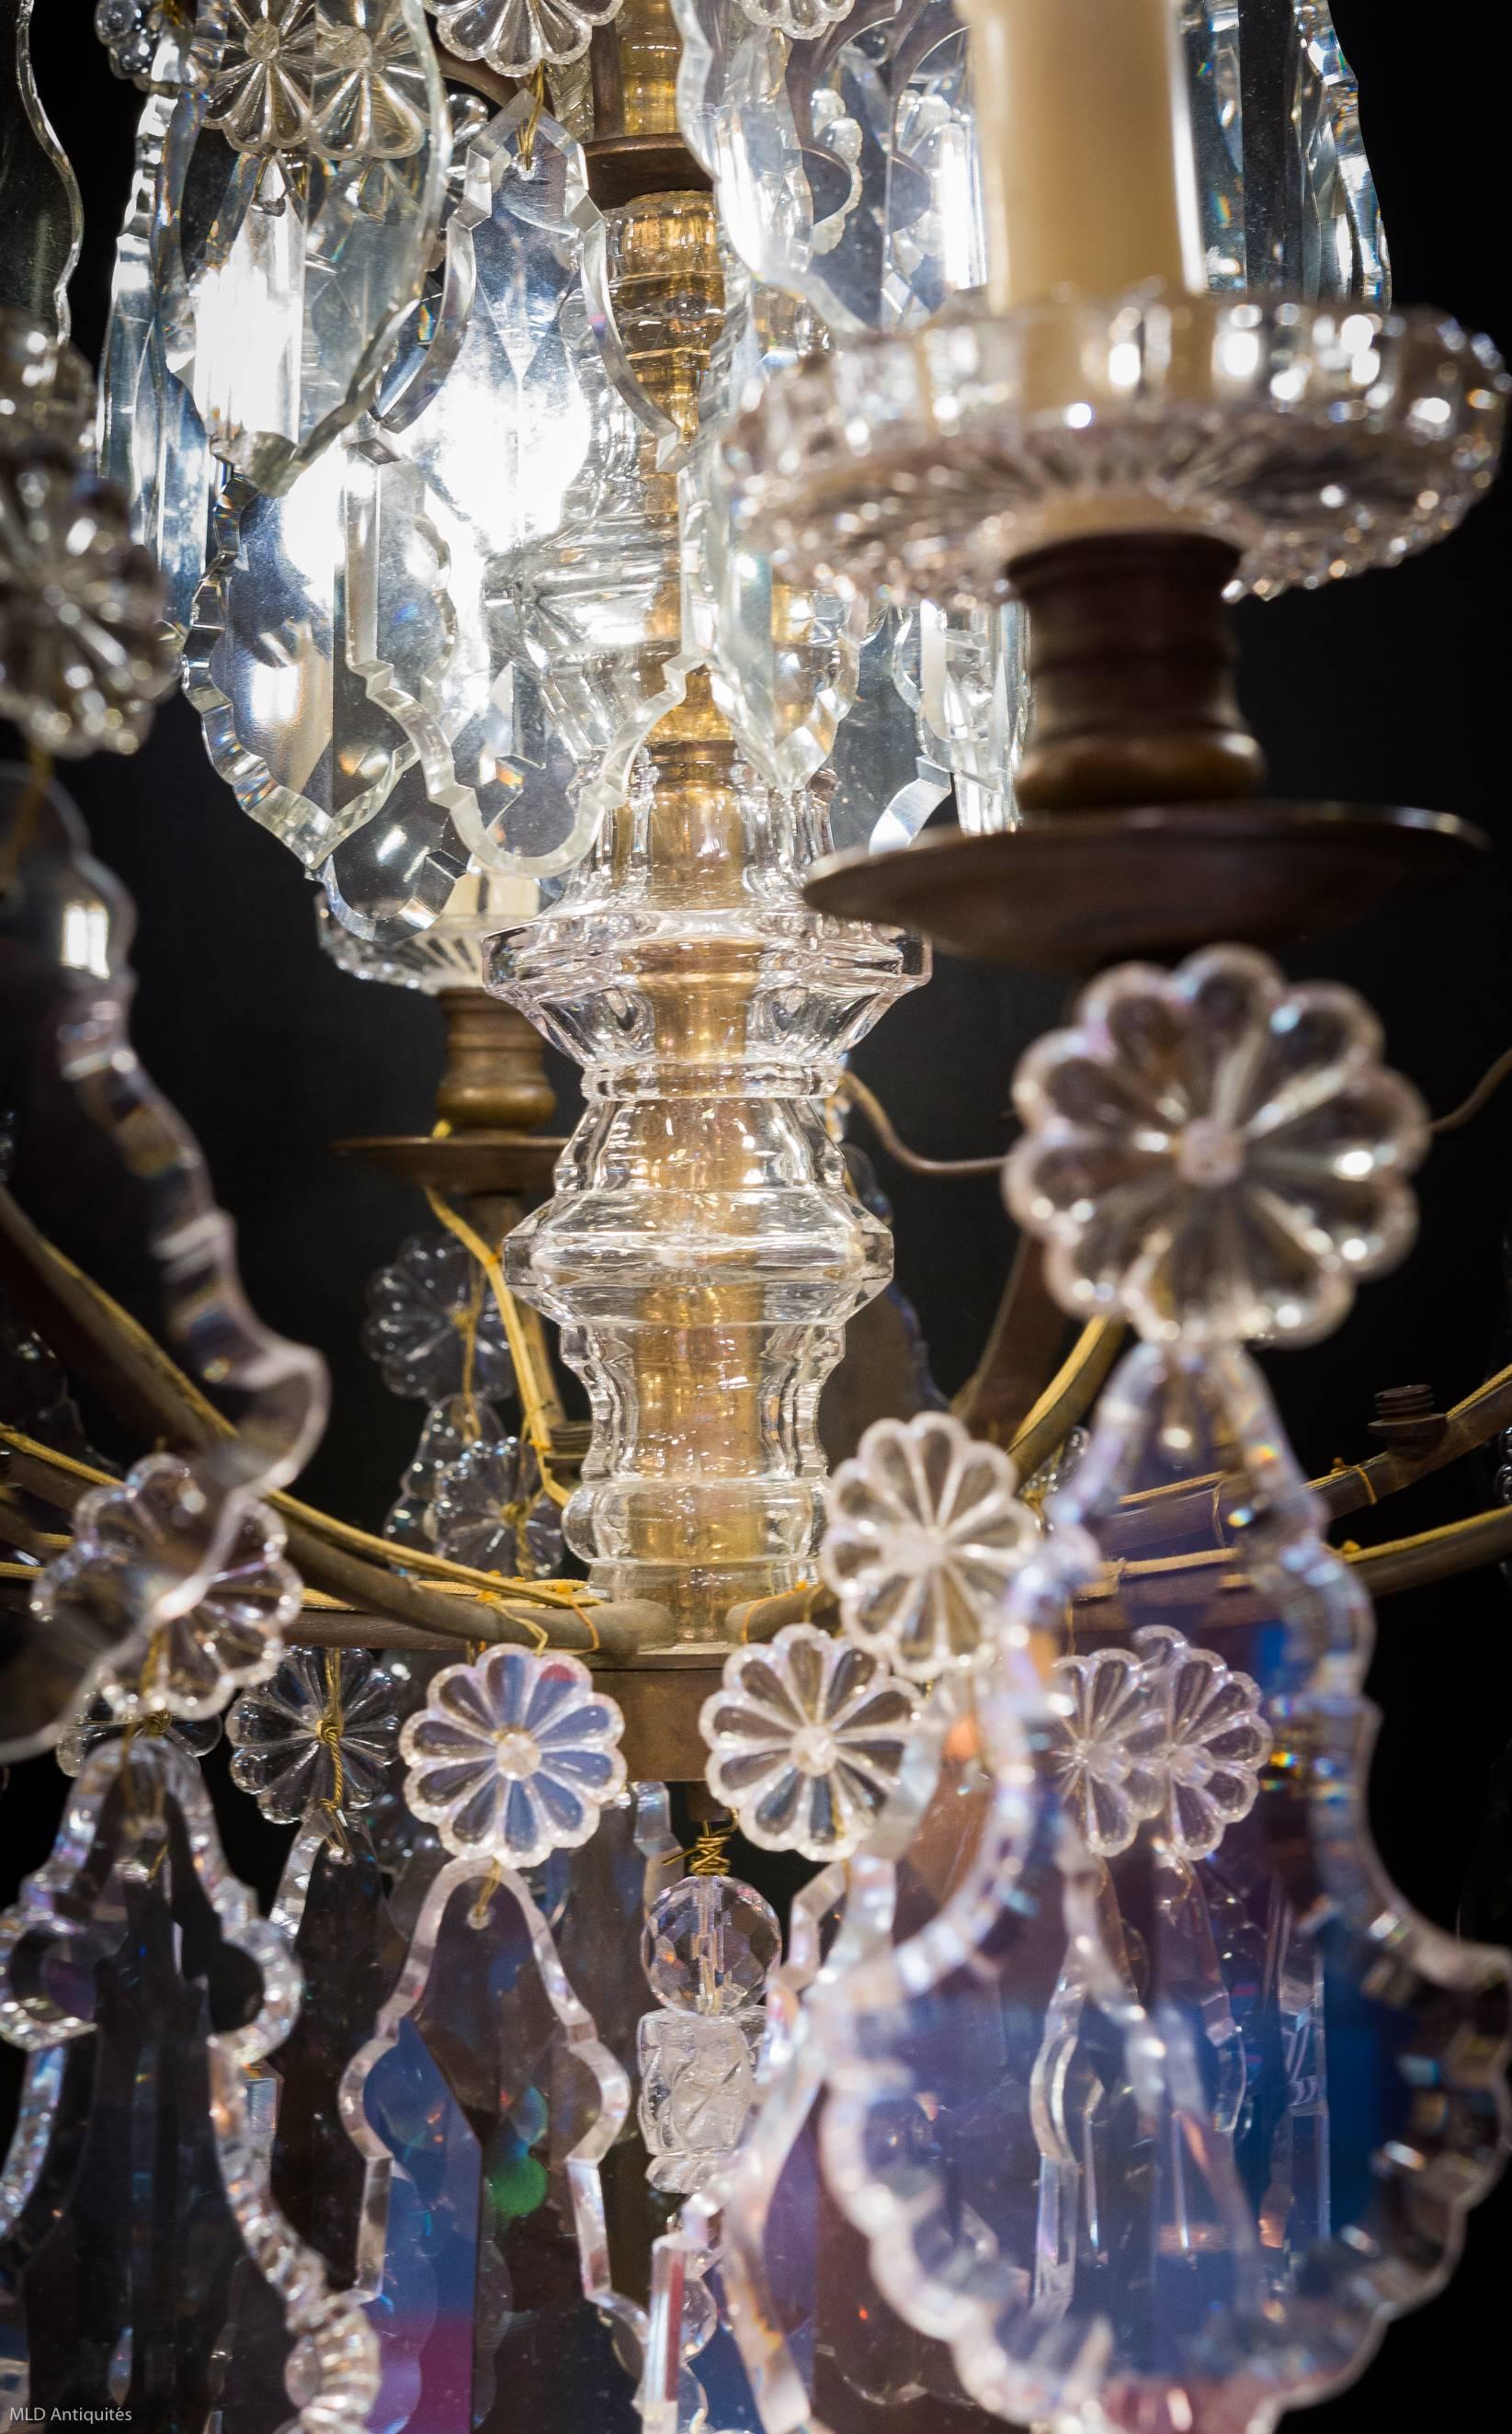 Bronze Mid-19th Century Ormolu and Crystal Chandelier by Cristalleries Baccarat, 1860